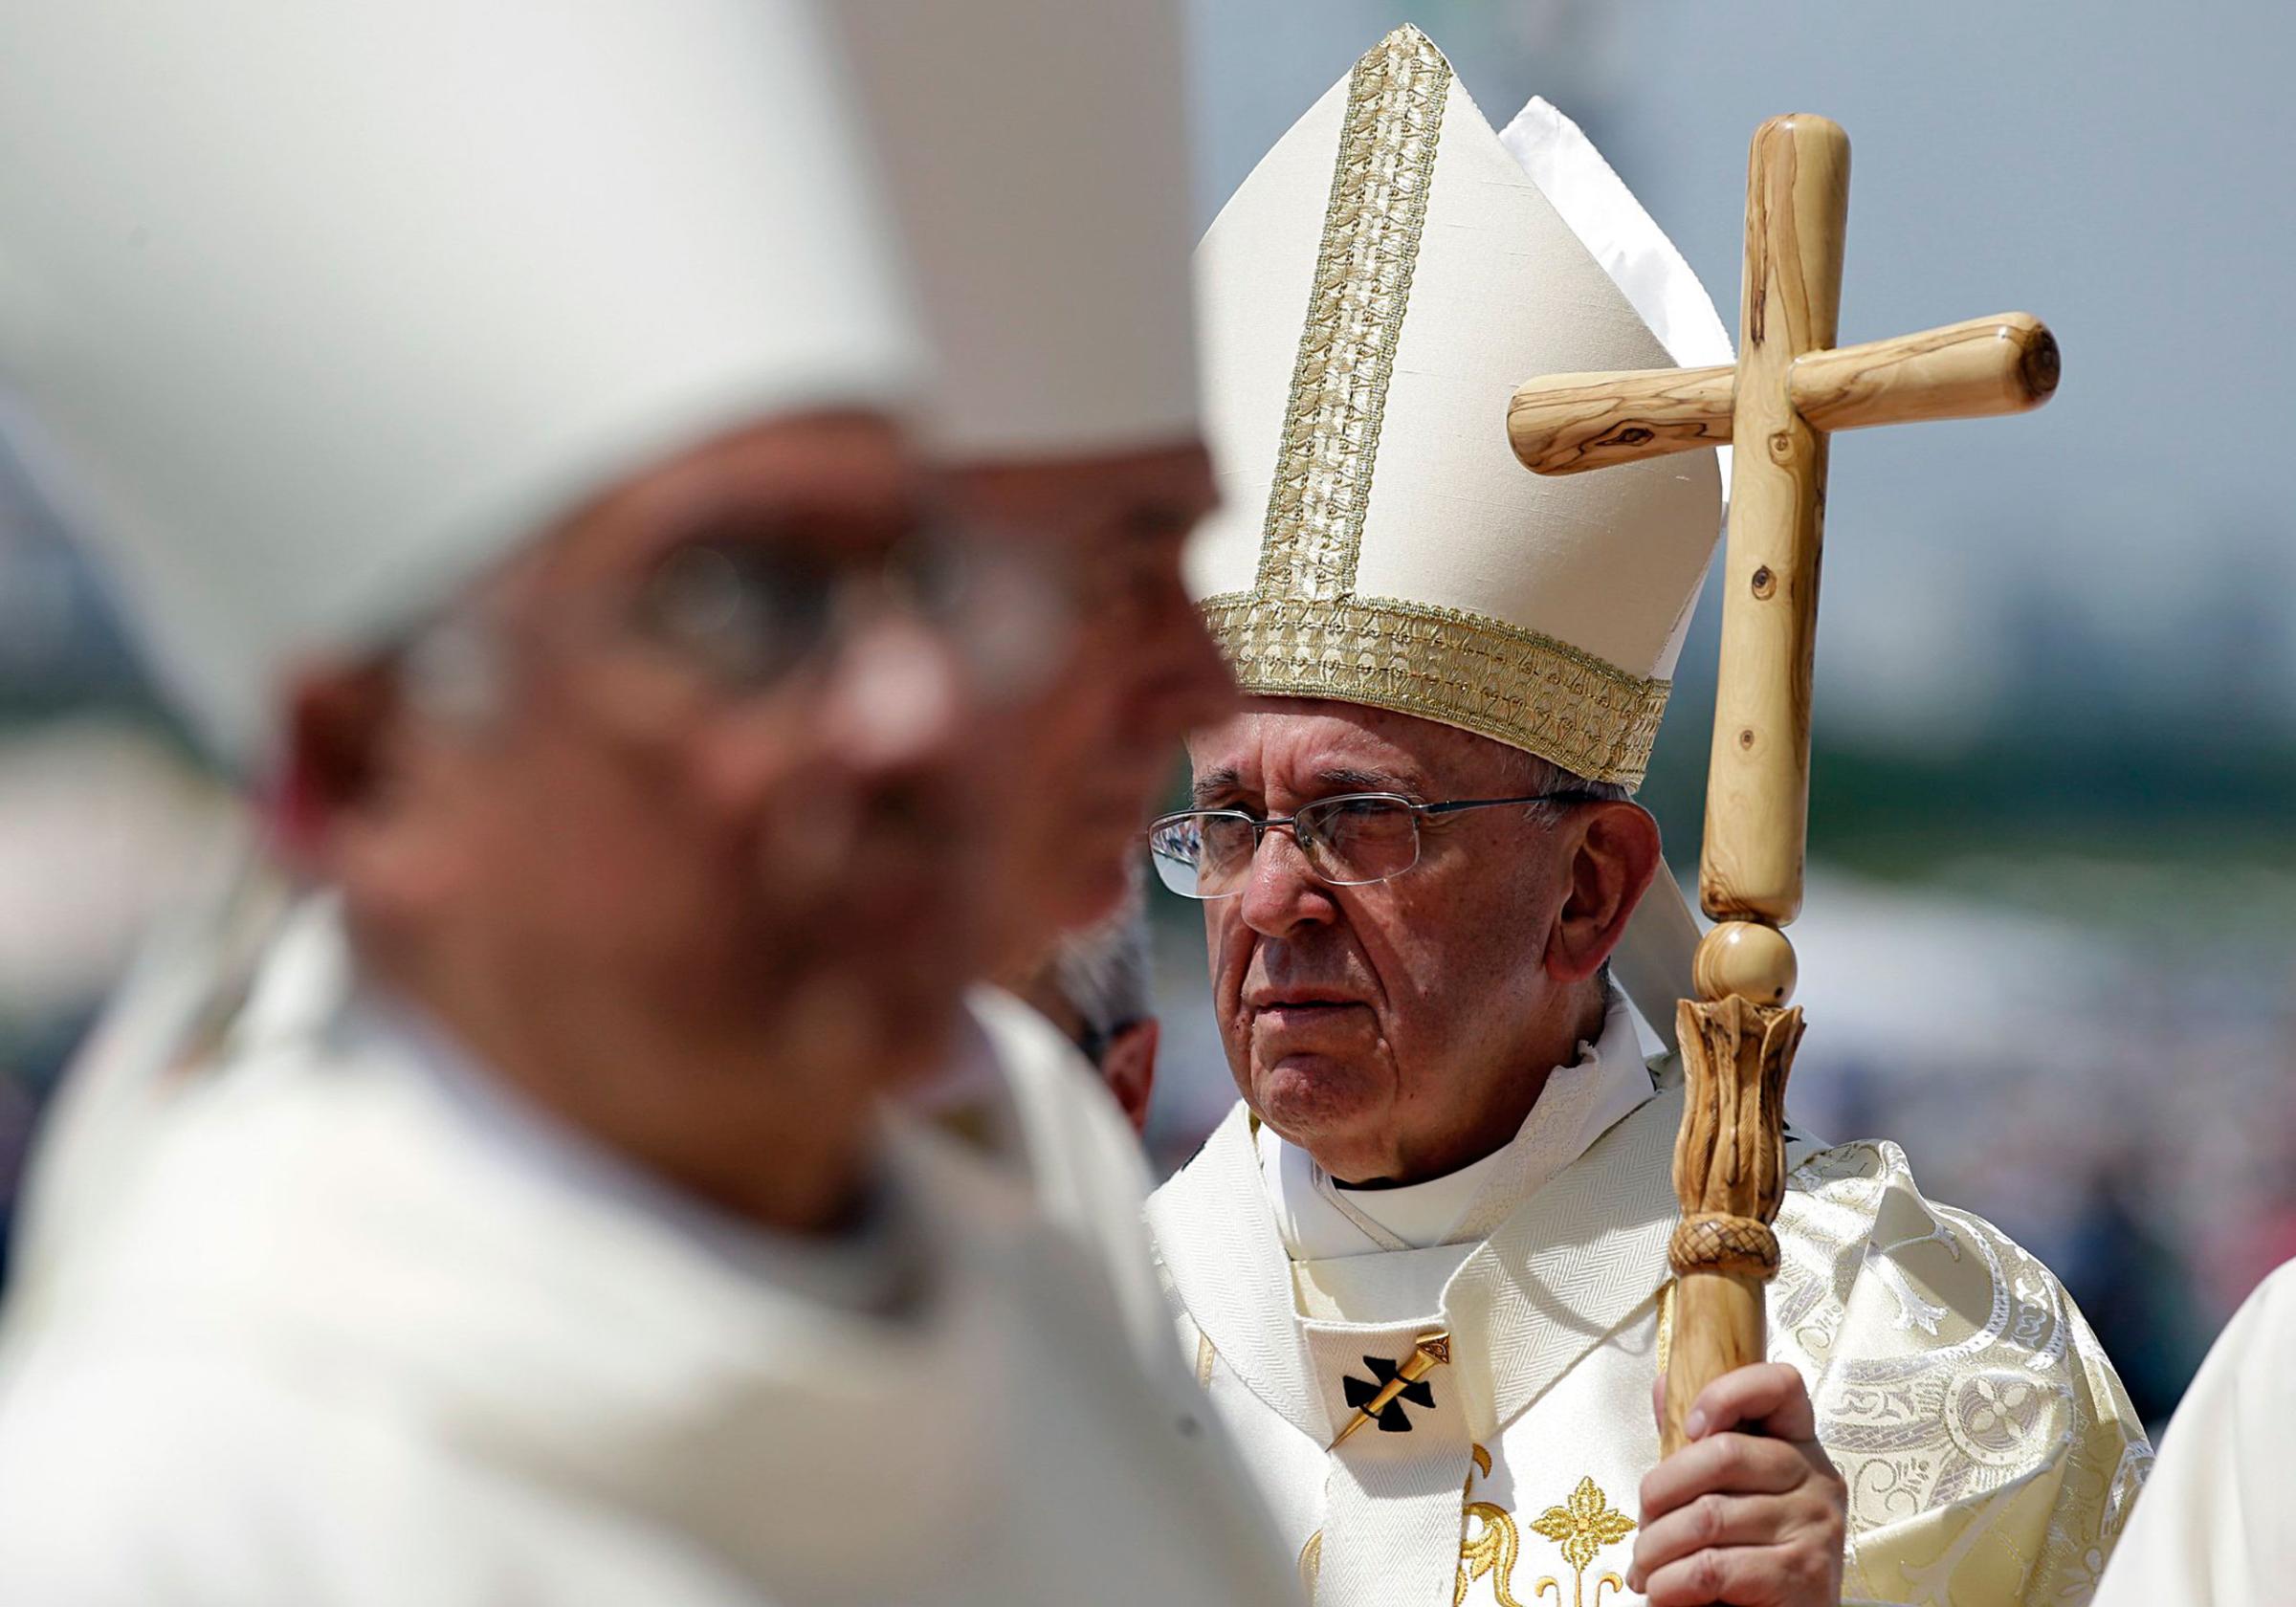 Pope Francis walks with his pastoral staff to celebrate a Mass in Guayaquil, Ecuador, Monday, July 6, 2015. Latin America's first pope arrived in this port city on Monday for the first big event of a three-nation tour where he's set compassion for the weak and respect for the environment as central themes. (AP Photo/Gregorio Borgia)